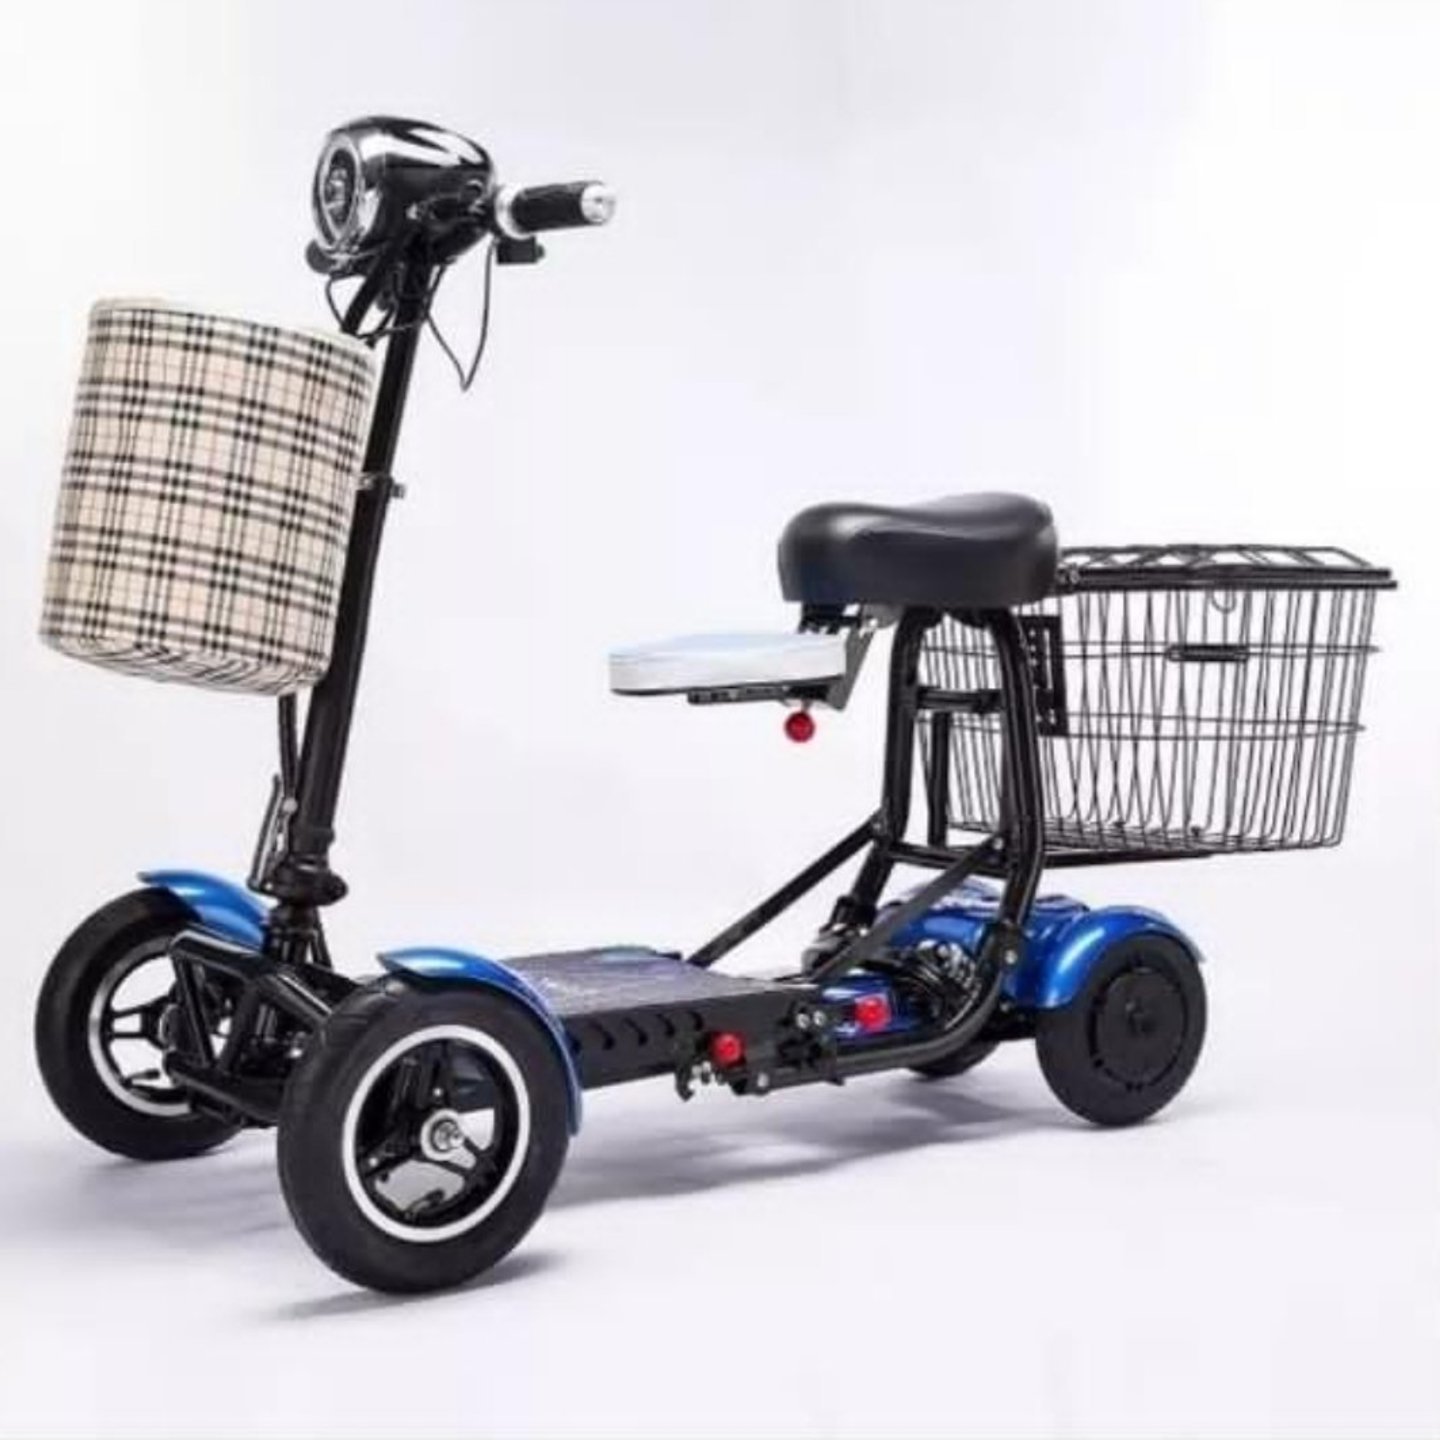 Flexi 4 wheels stable Mobility Scooter